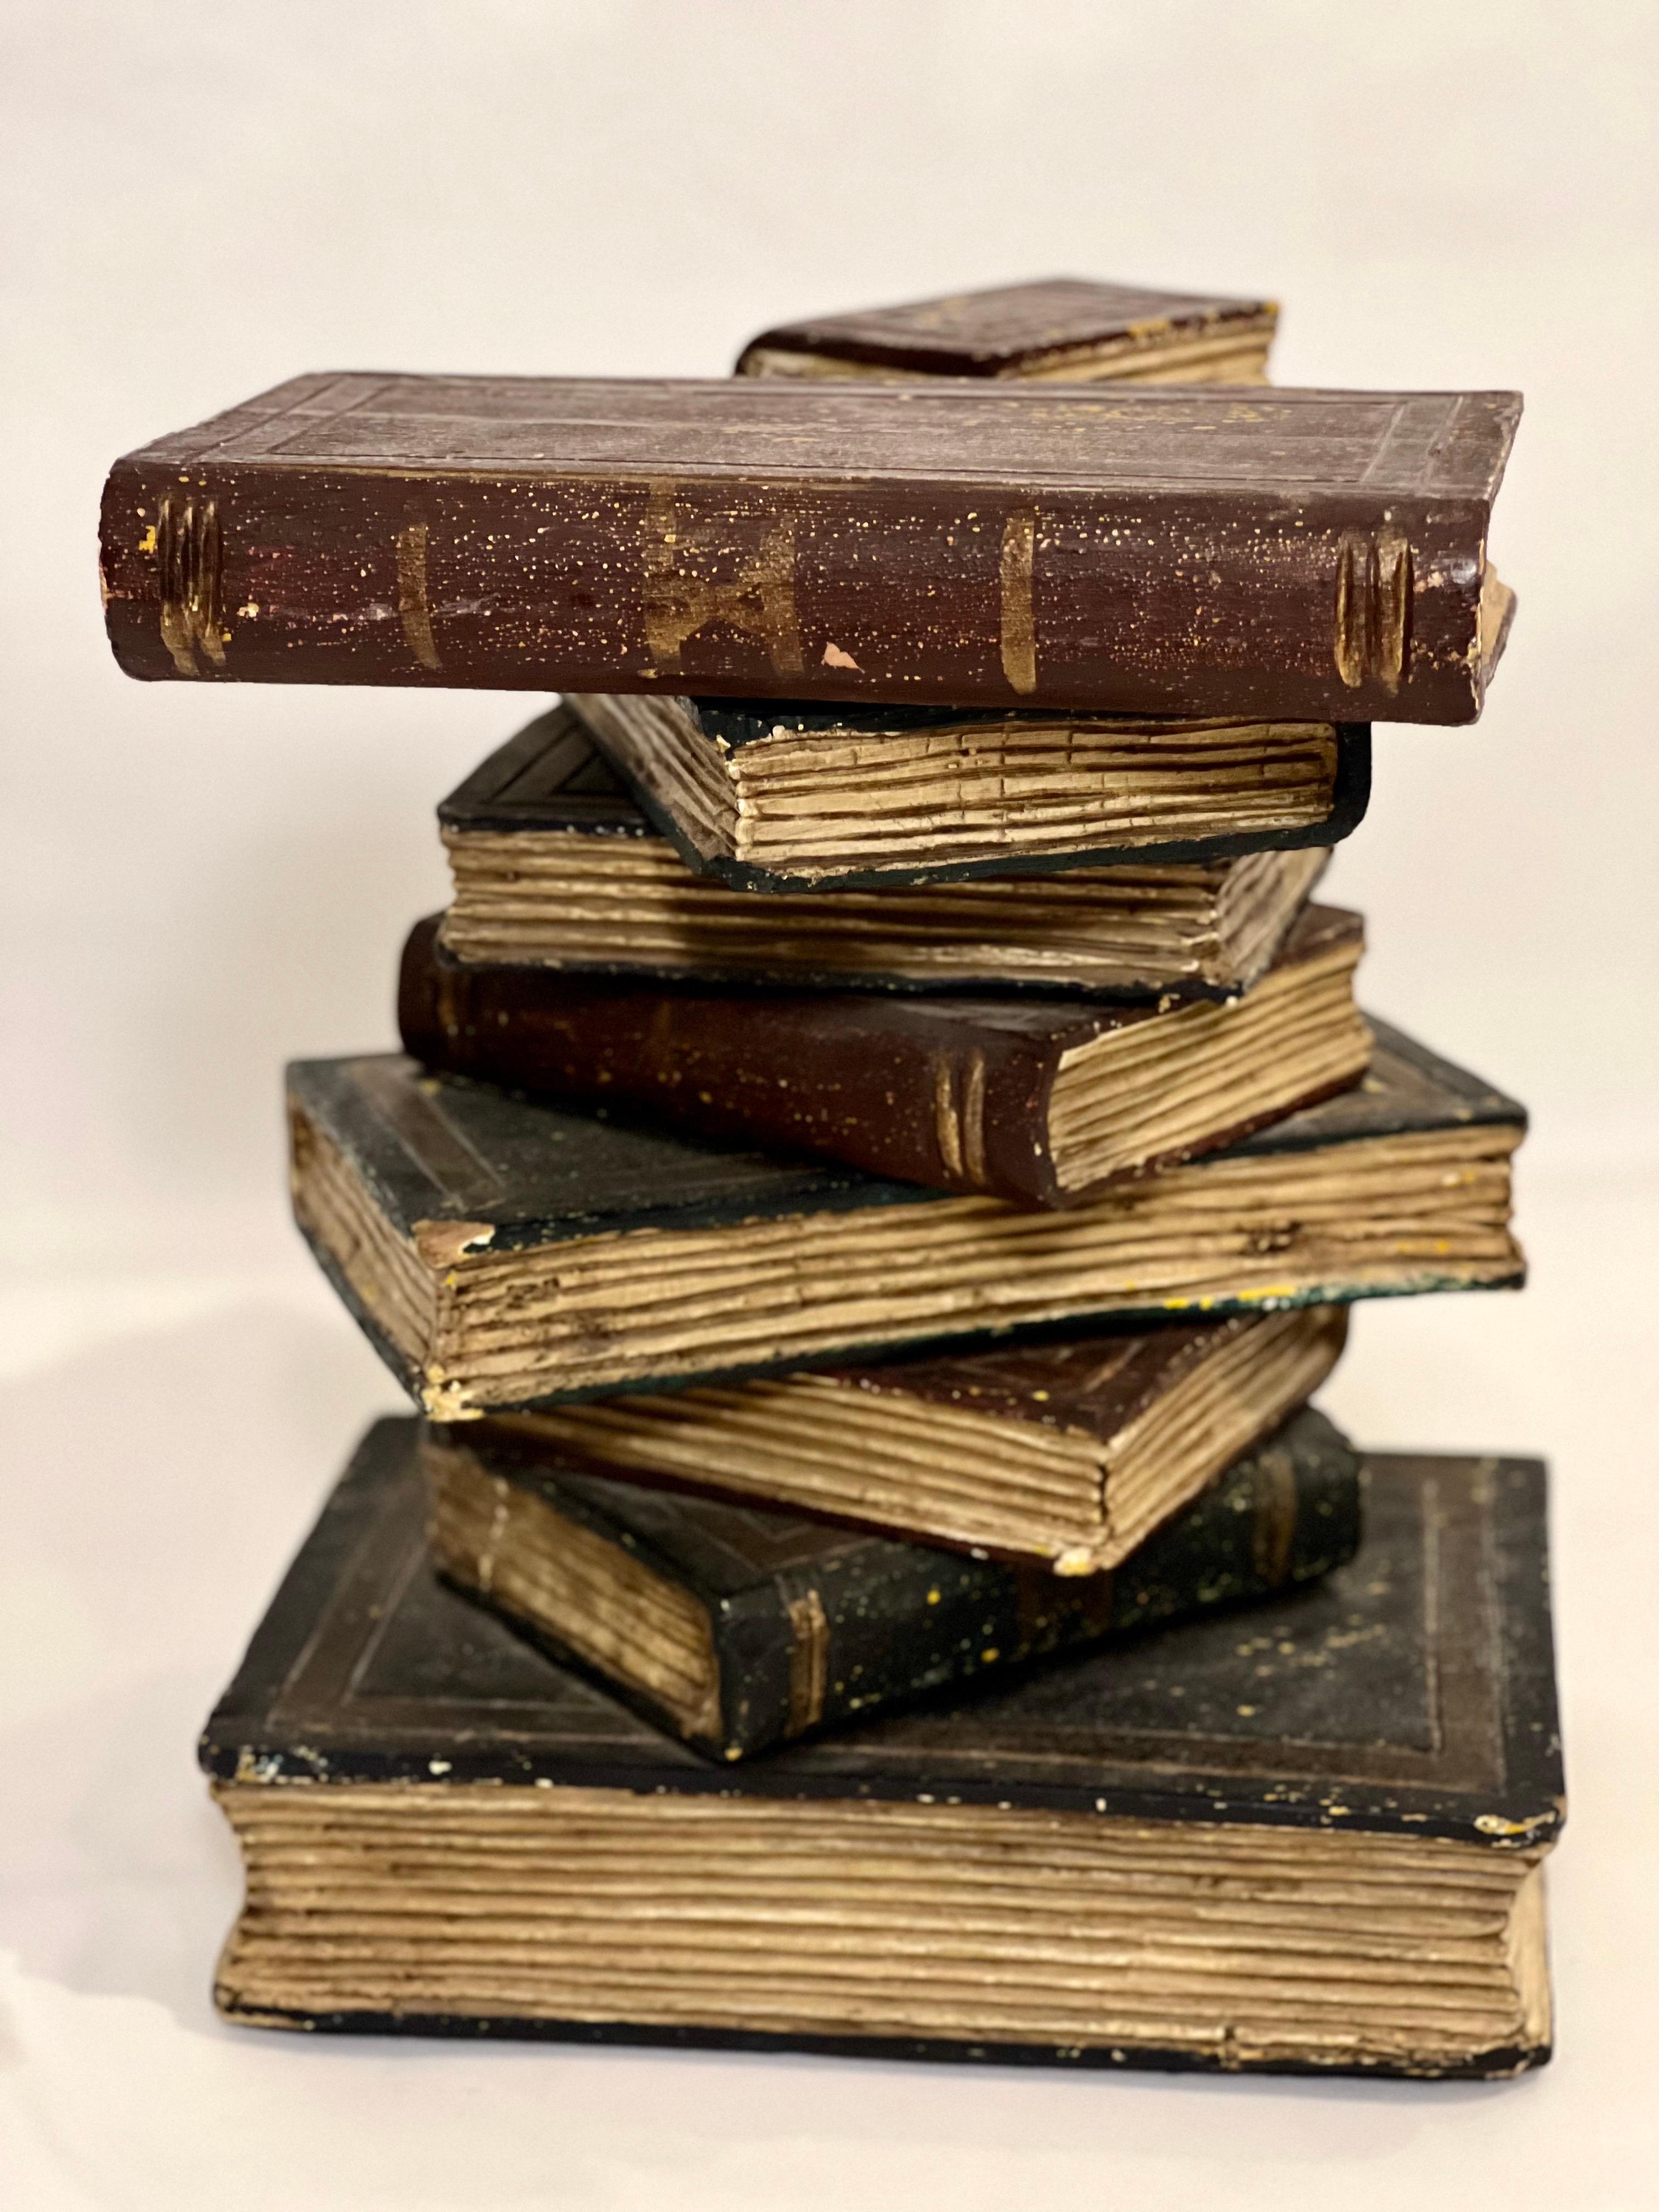 Vintage faux stacked book sculptural wood side table.

Great table featuring nine wood faux books in lifelike stacked form. Each book has realistic texture with painted gold details and intricately carved pages. The table's rustic character and deep